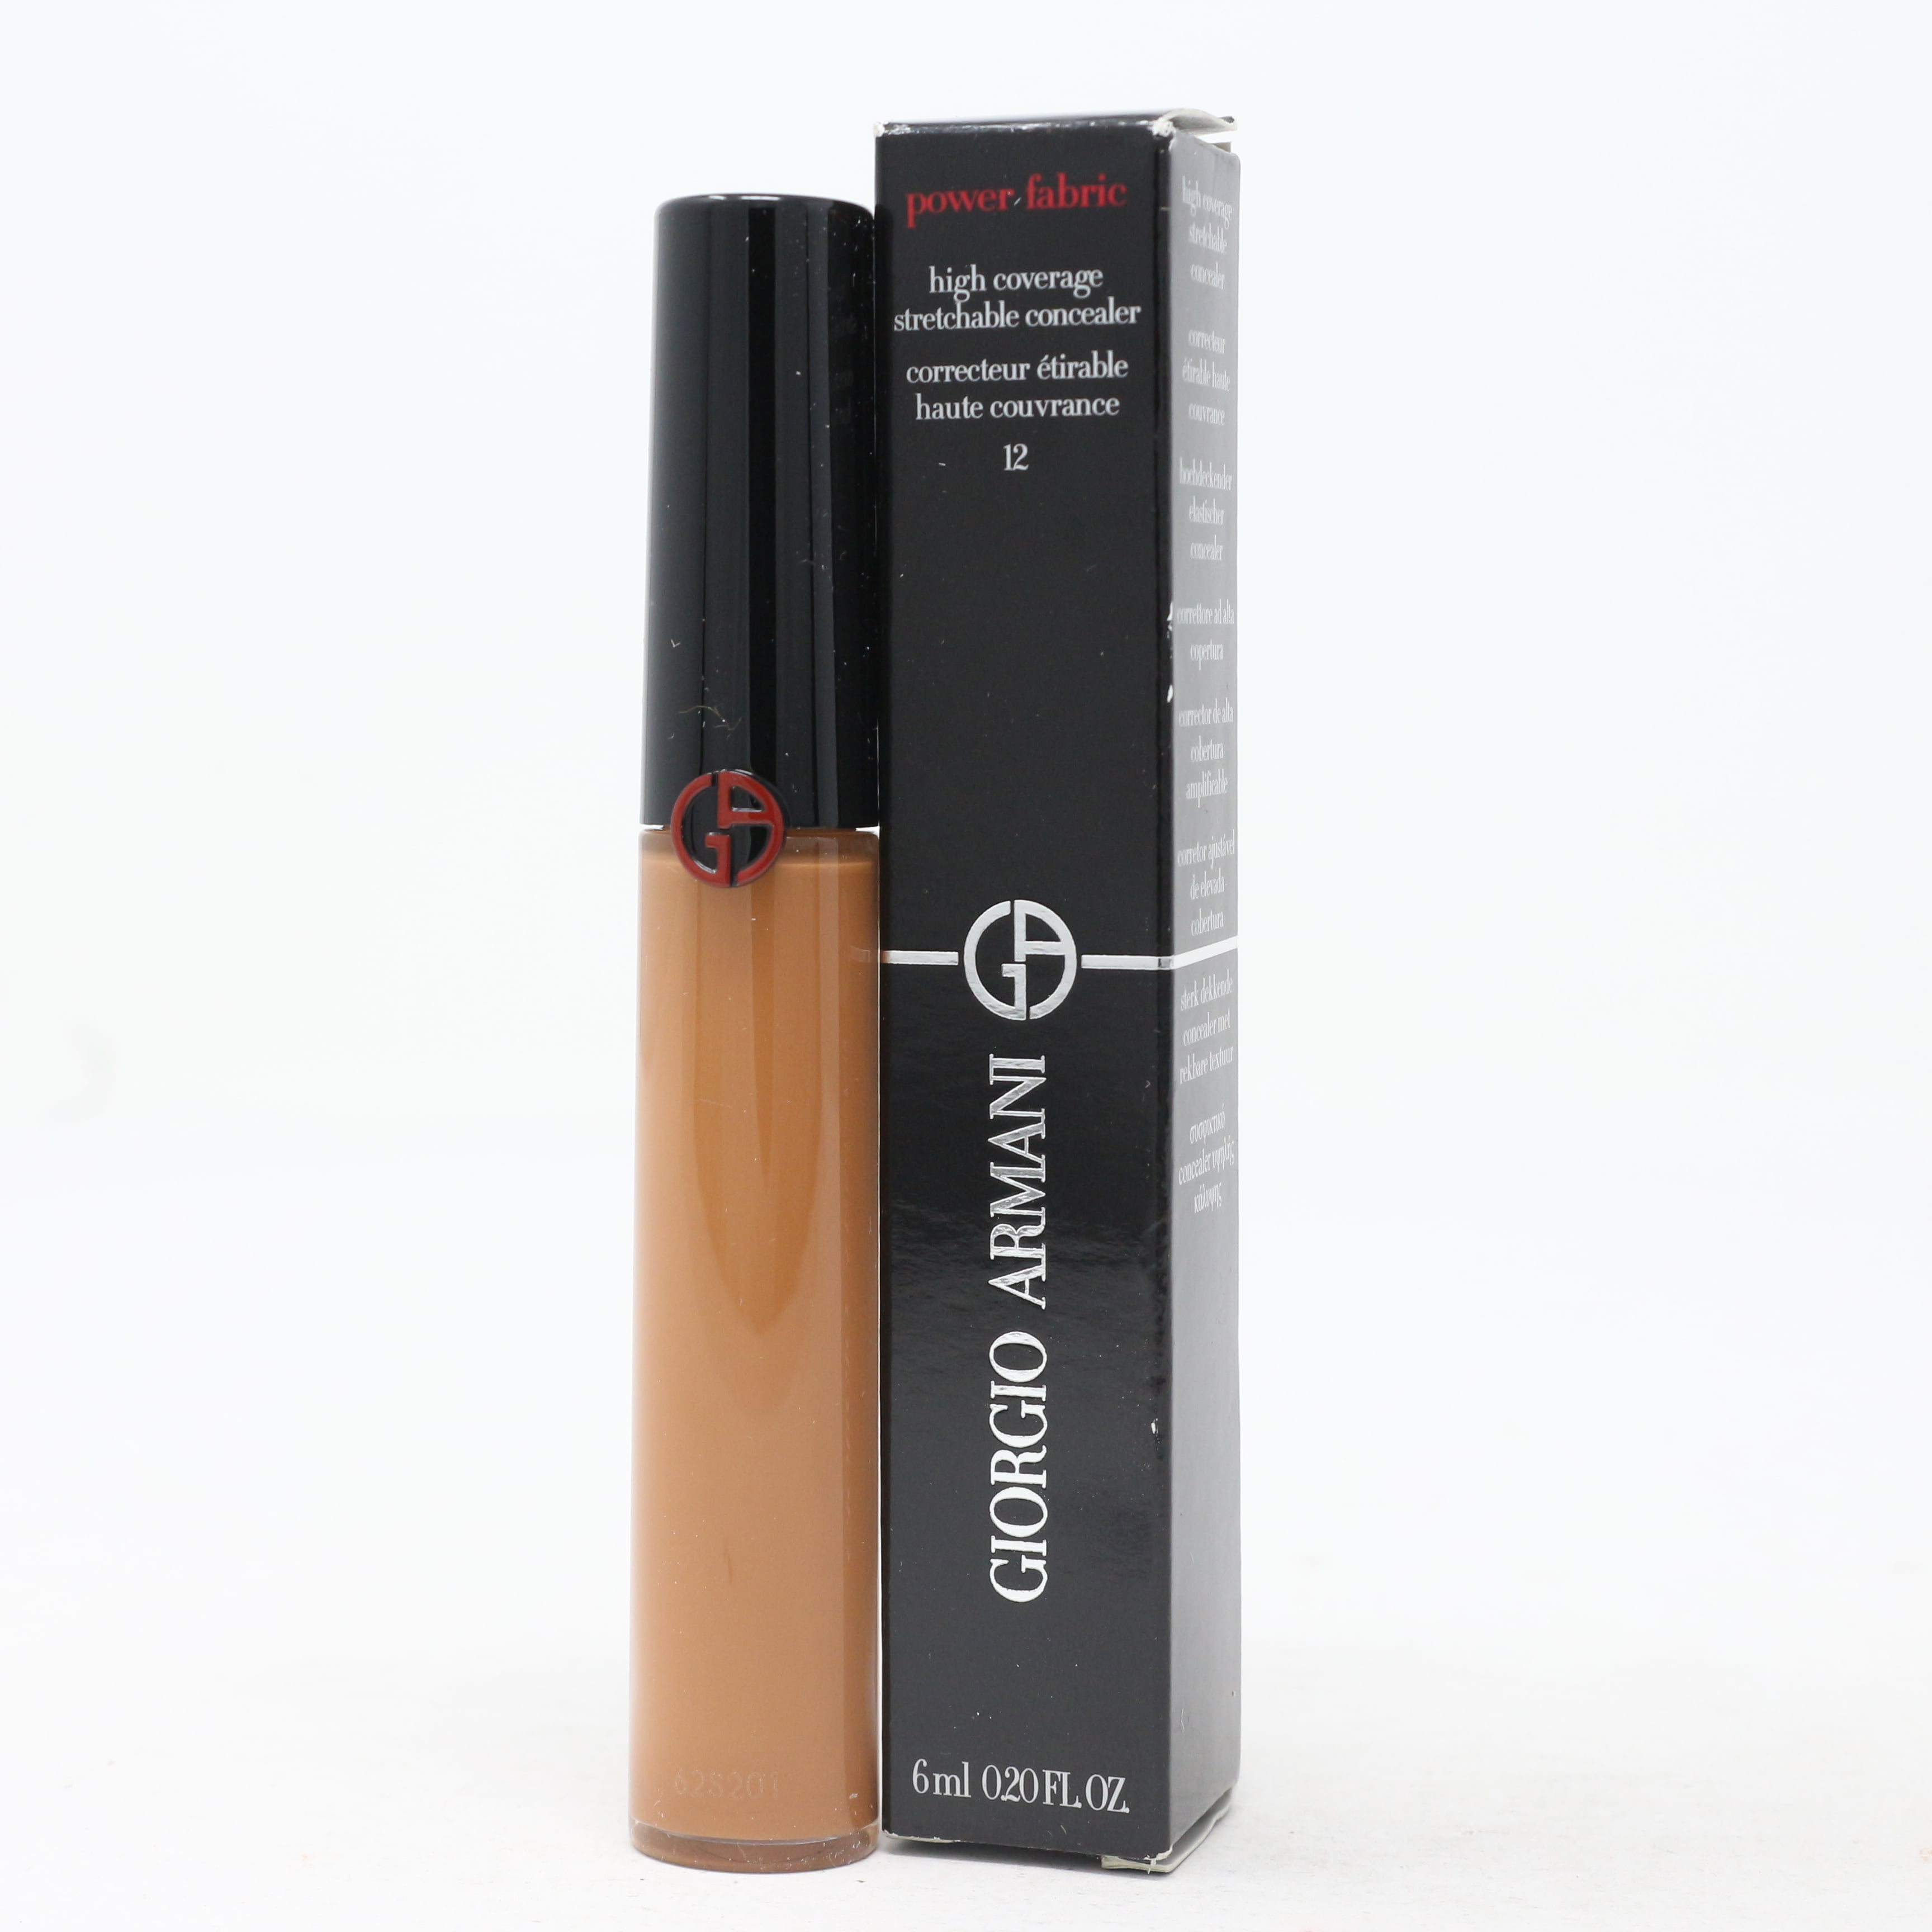 virksomhed Nonsens Vær sød at lade være Giorgio Armani Power Fabric Concealer 13 0.2oz/6ml New With Box -  Walmart.com